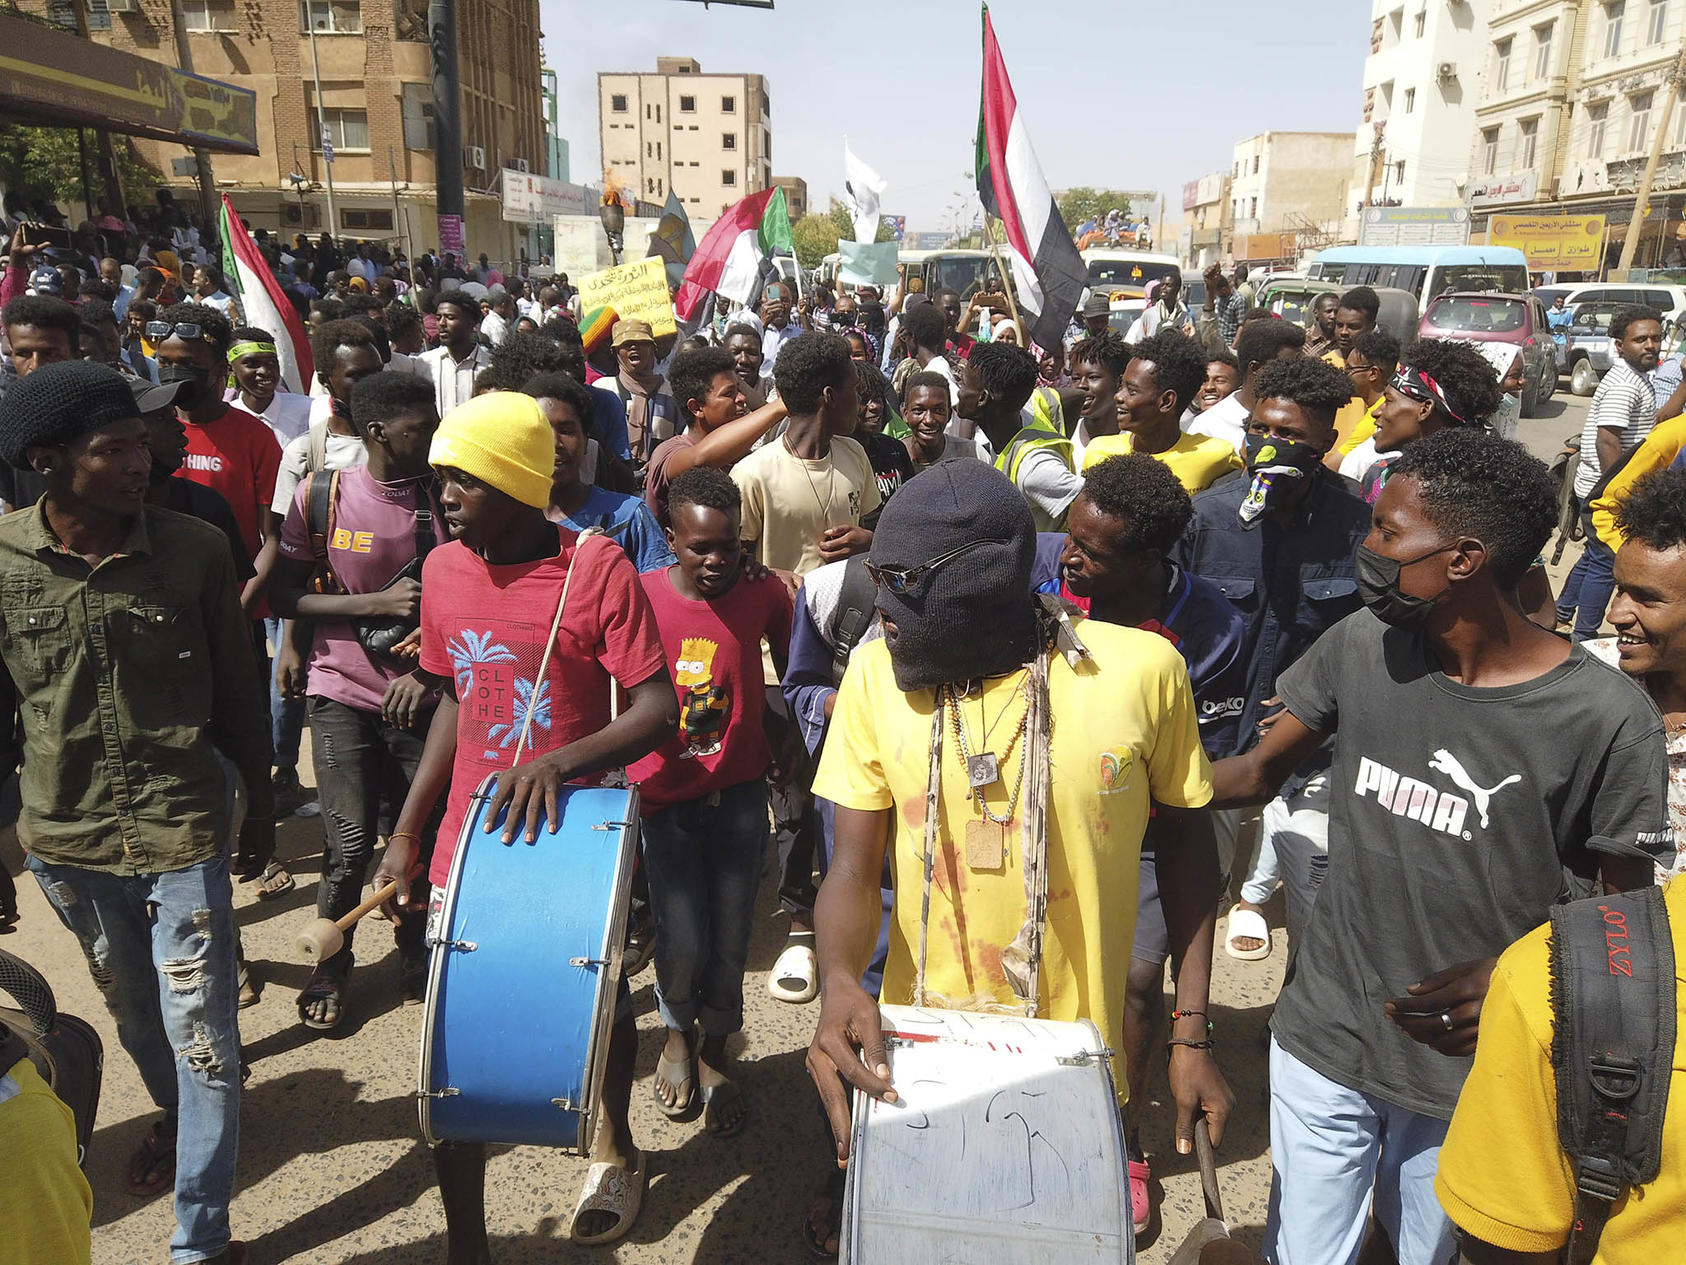 Sudanese march in the city of Omdurman last March as civilians anticipated a deadline for top generals to hand power to a civilian government. But the generals kept power — and instead went to war days later. (Faiz Abubakar Muhammed/The New York Times)